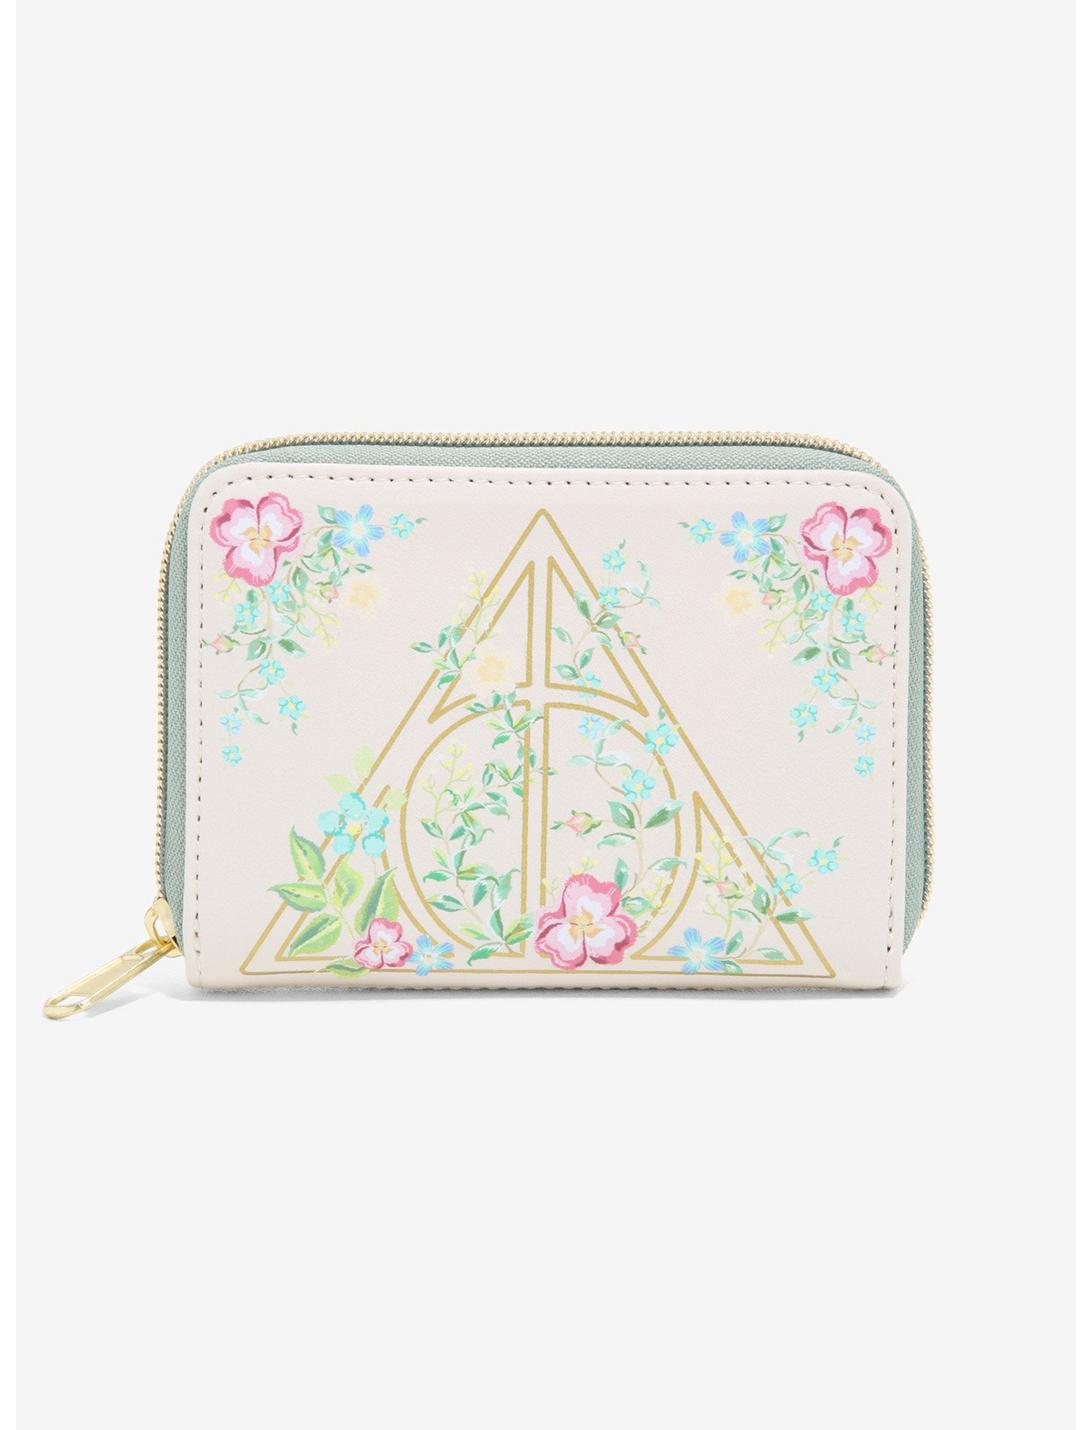 Loungefly Harry Potter Deathly Hallows Floral Mini Zipper Wallet, , hi-res